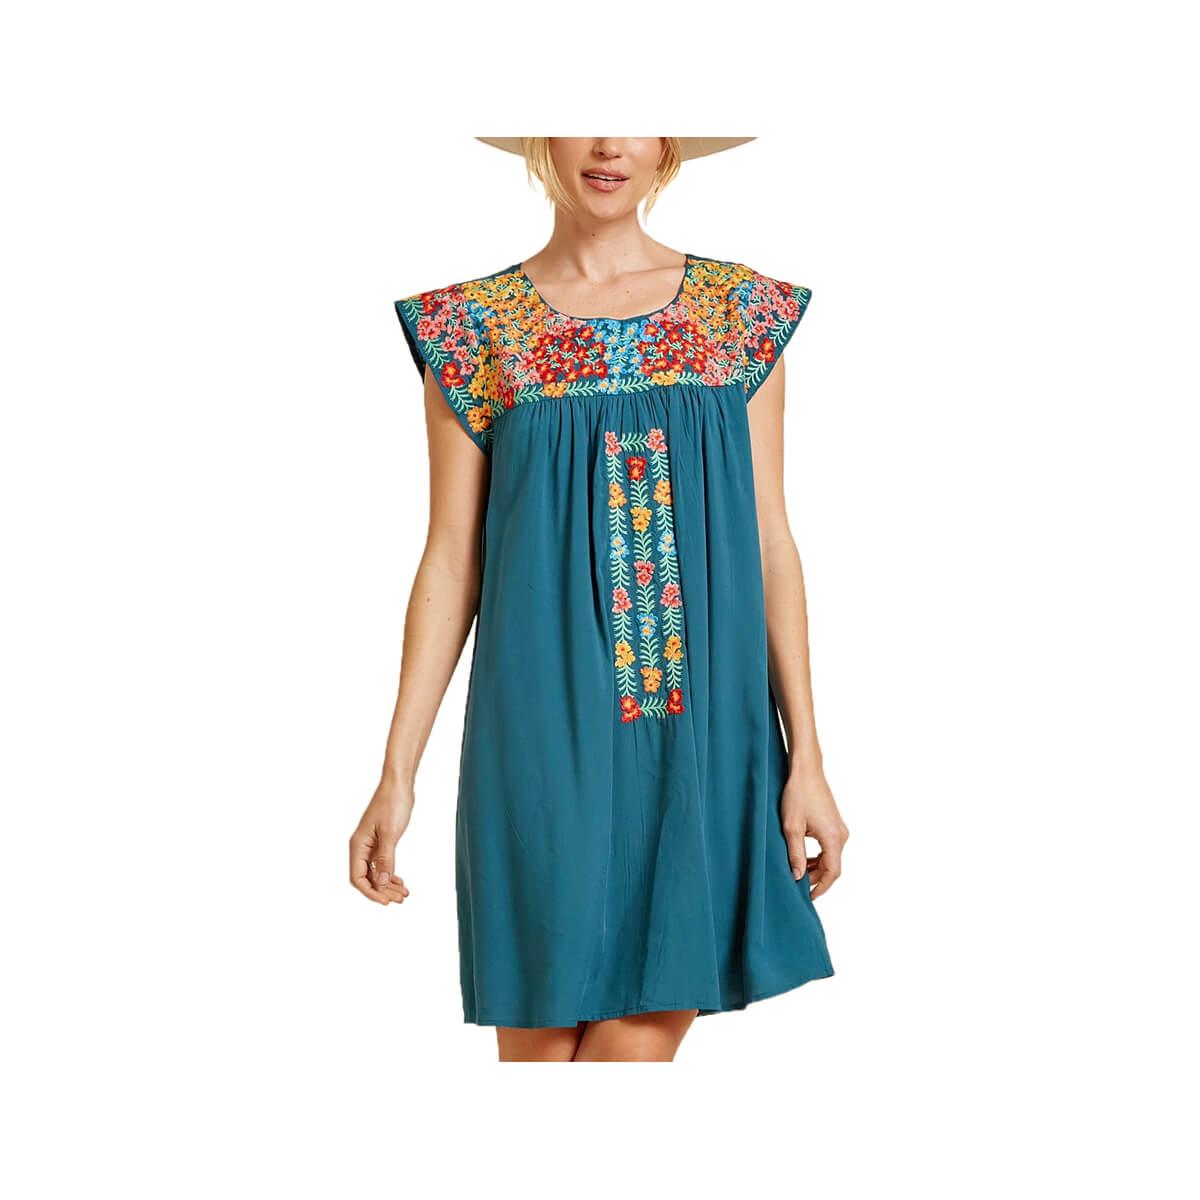  Women's Embroidered Square Neck Dolman Sleeve Dress